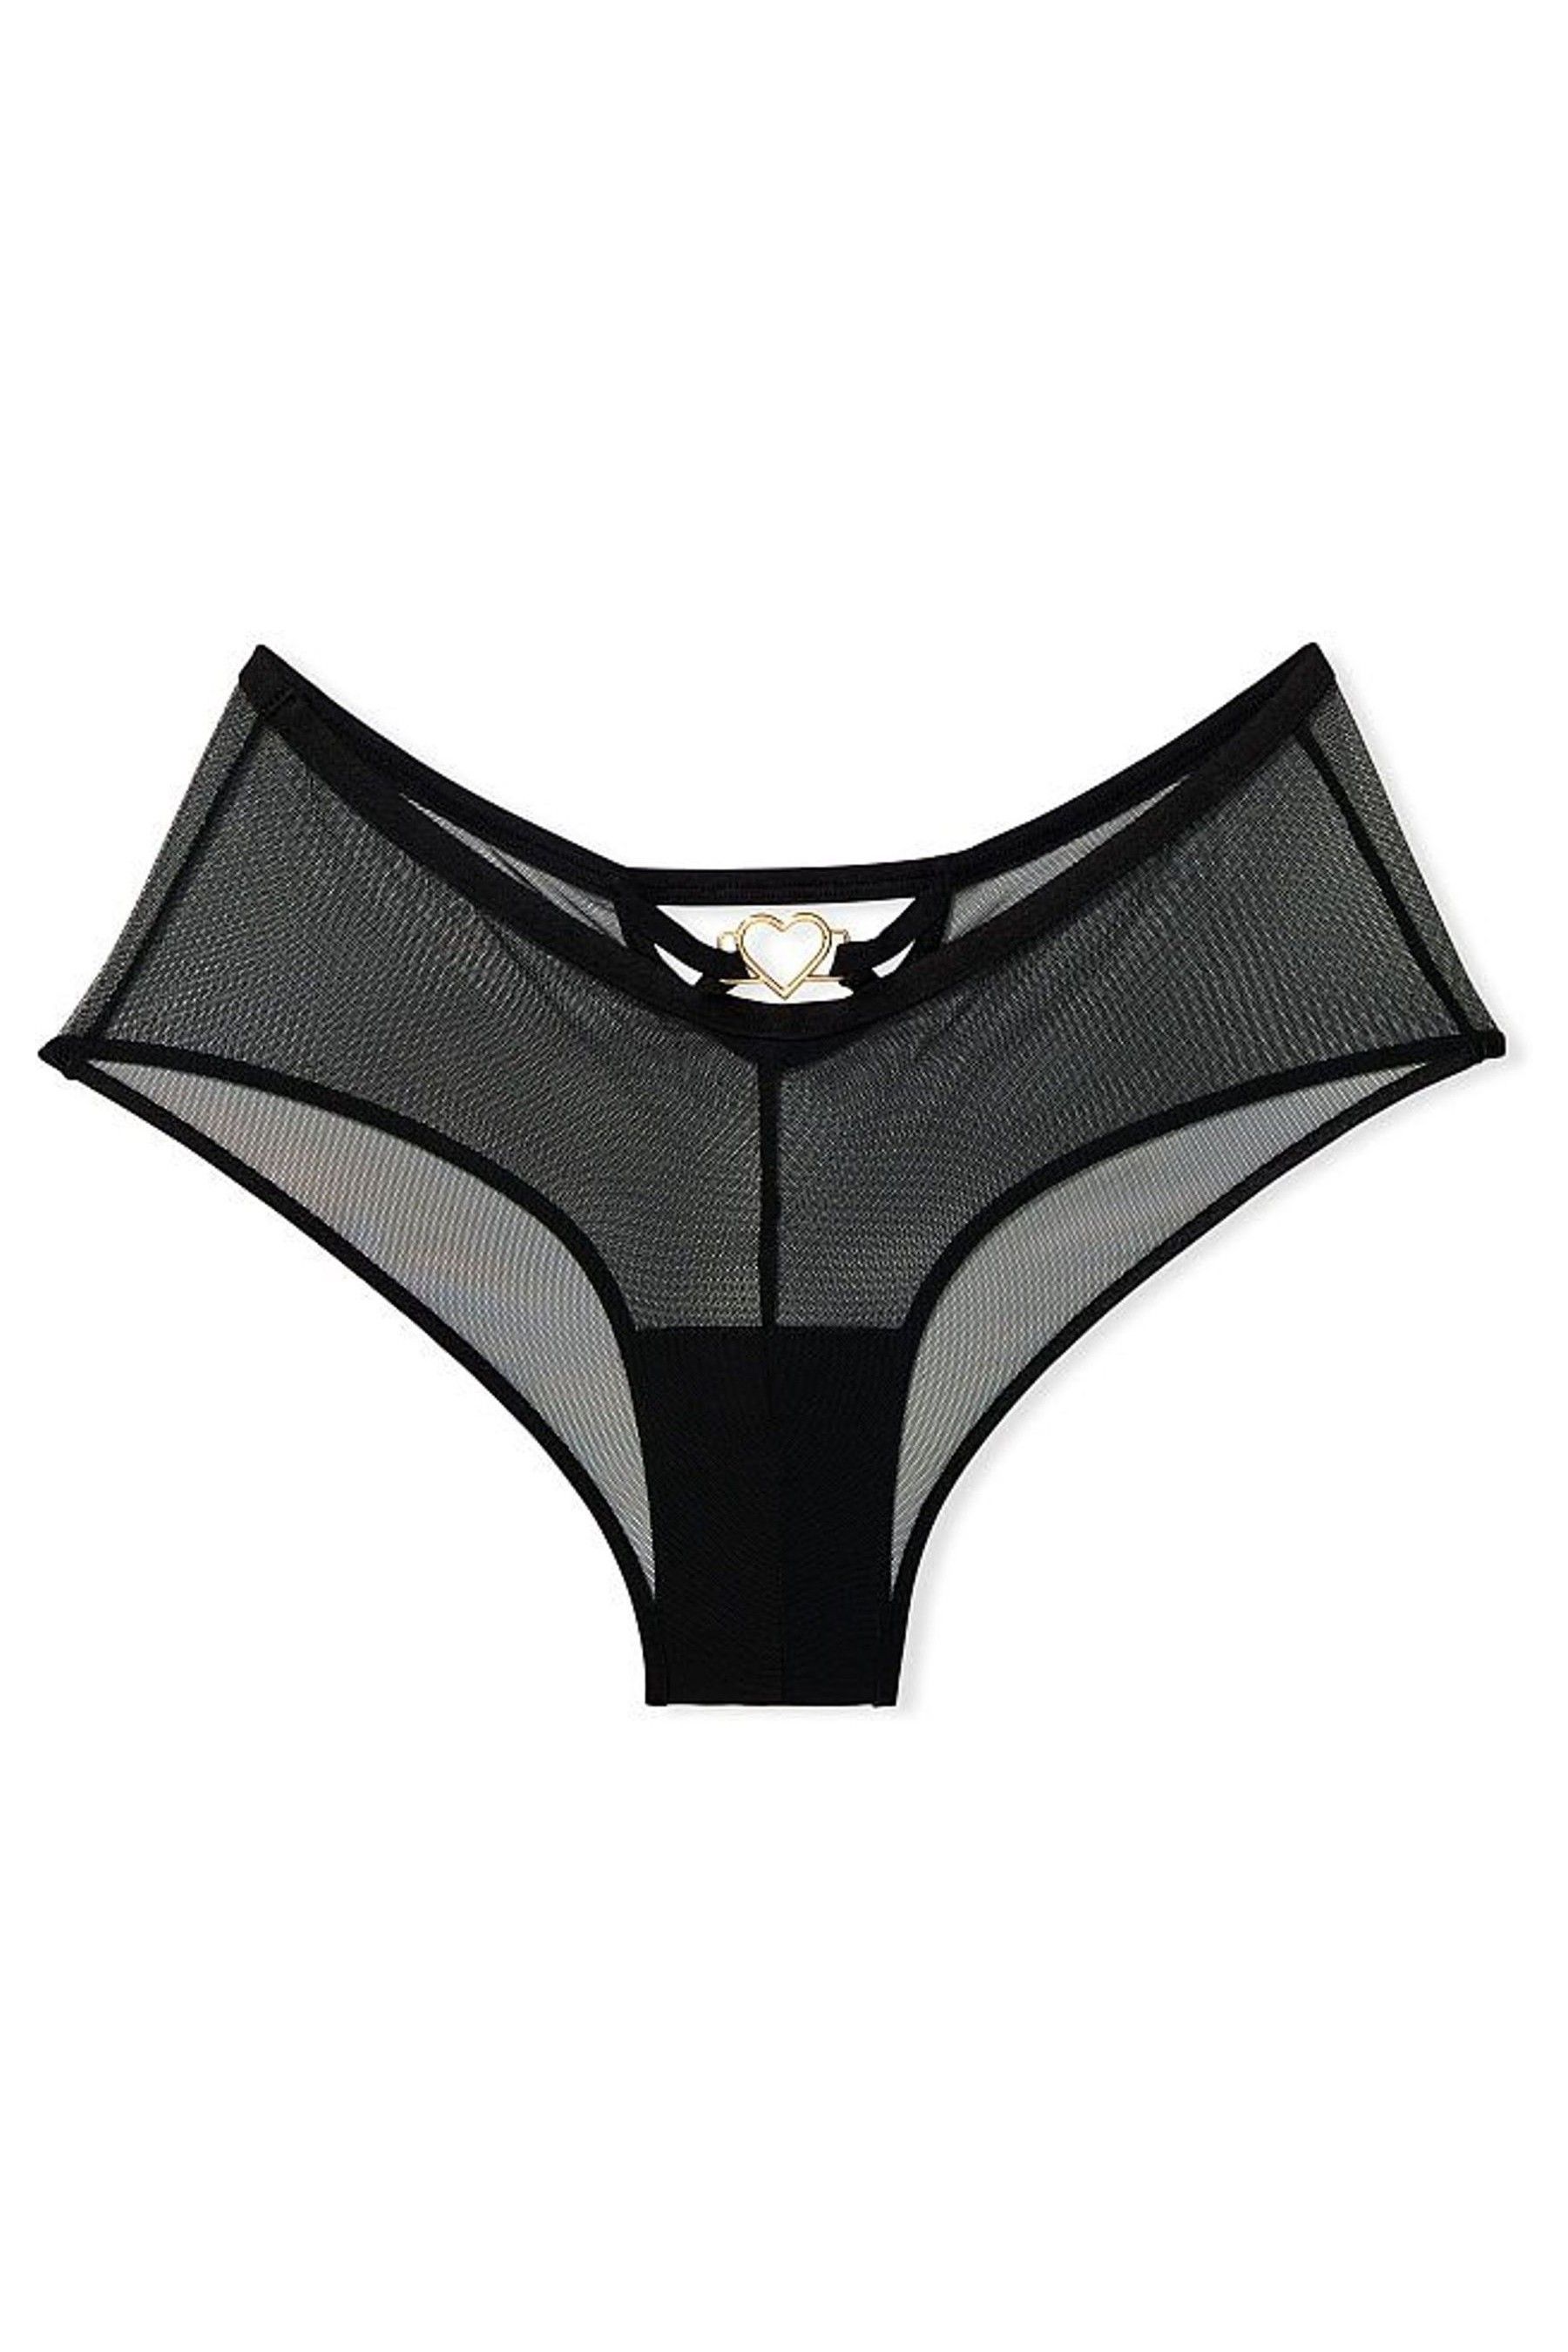 Buy Victoria S Secret Micro Lace Inset Cheeky Panty From The Victoria S Secret Uk Online Shop